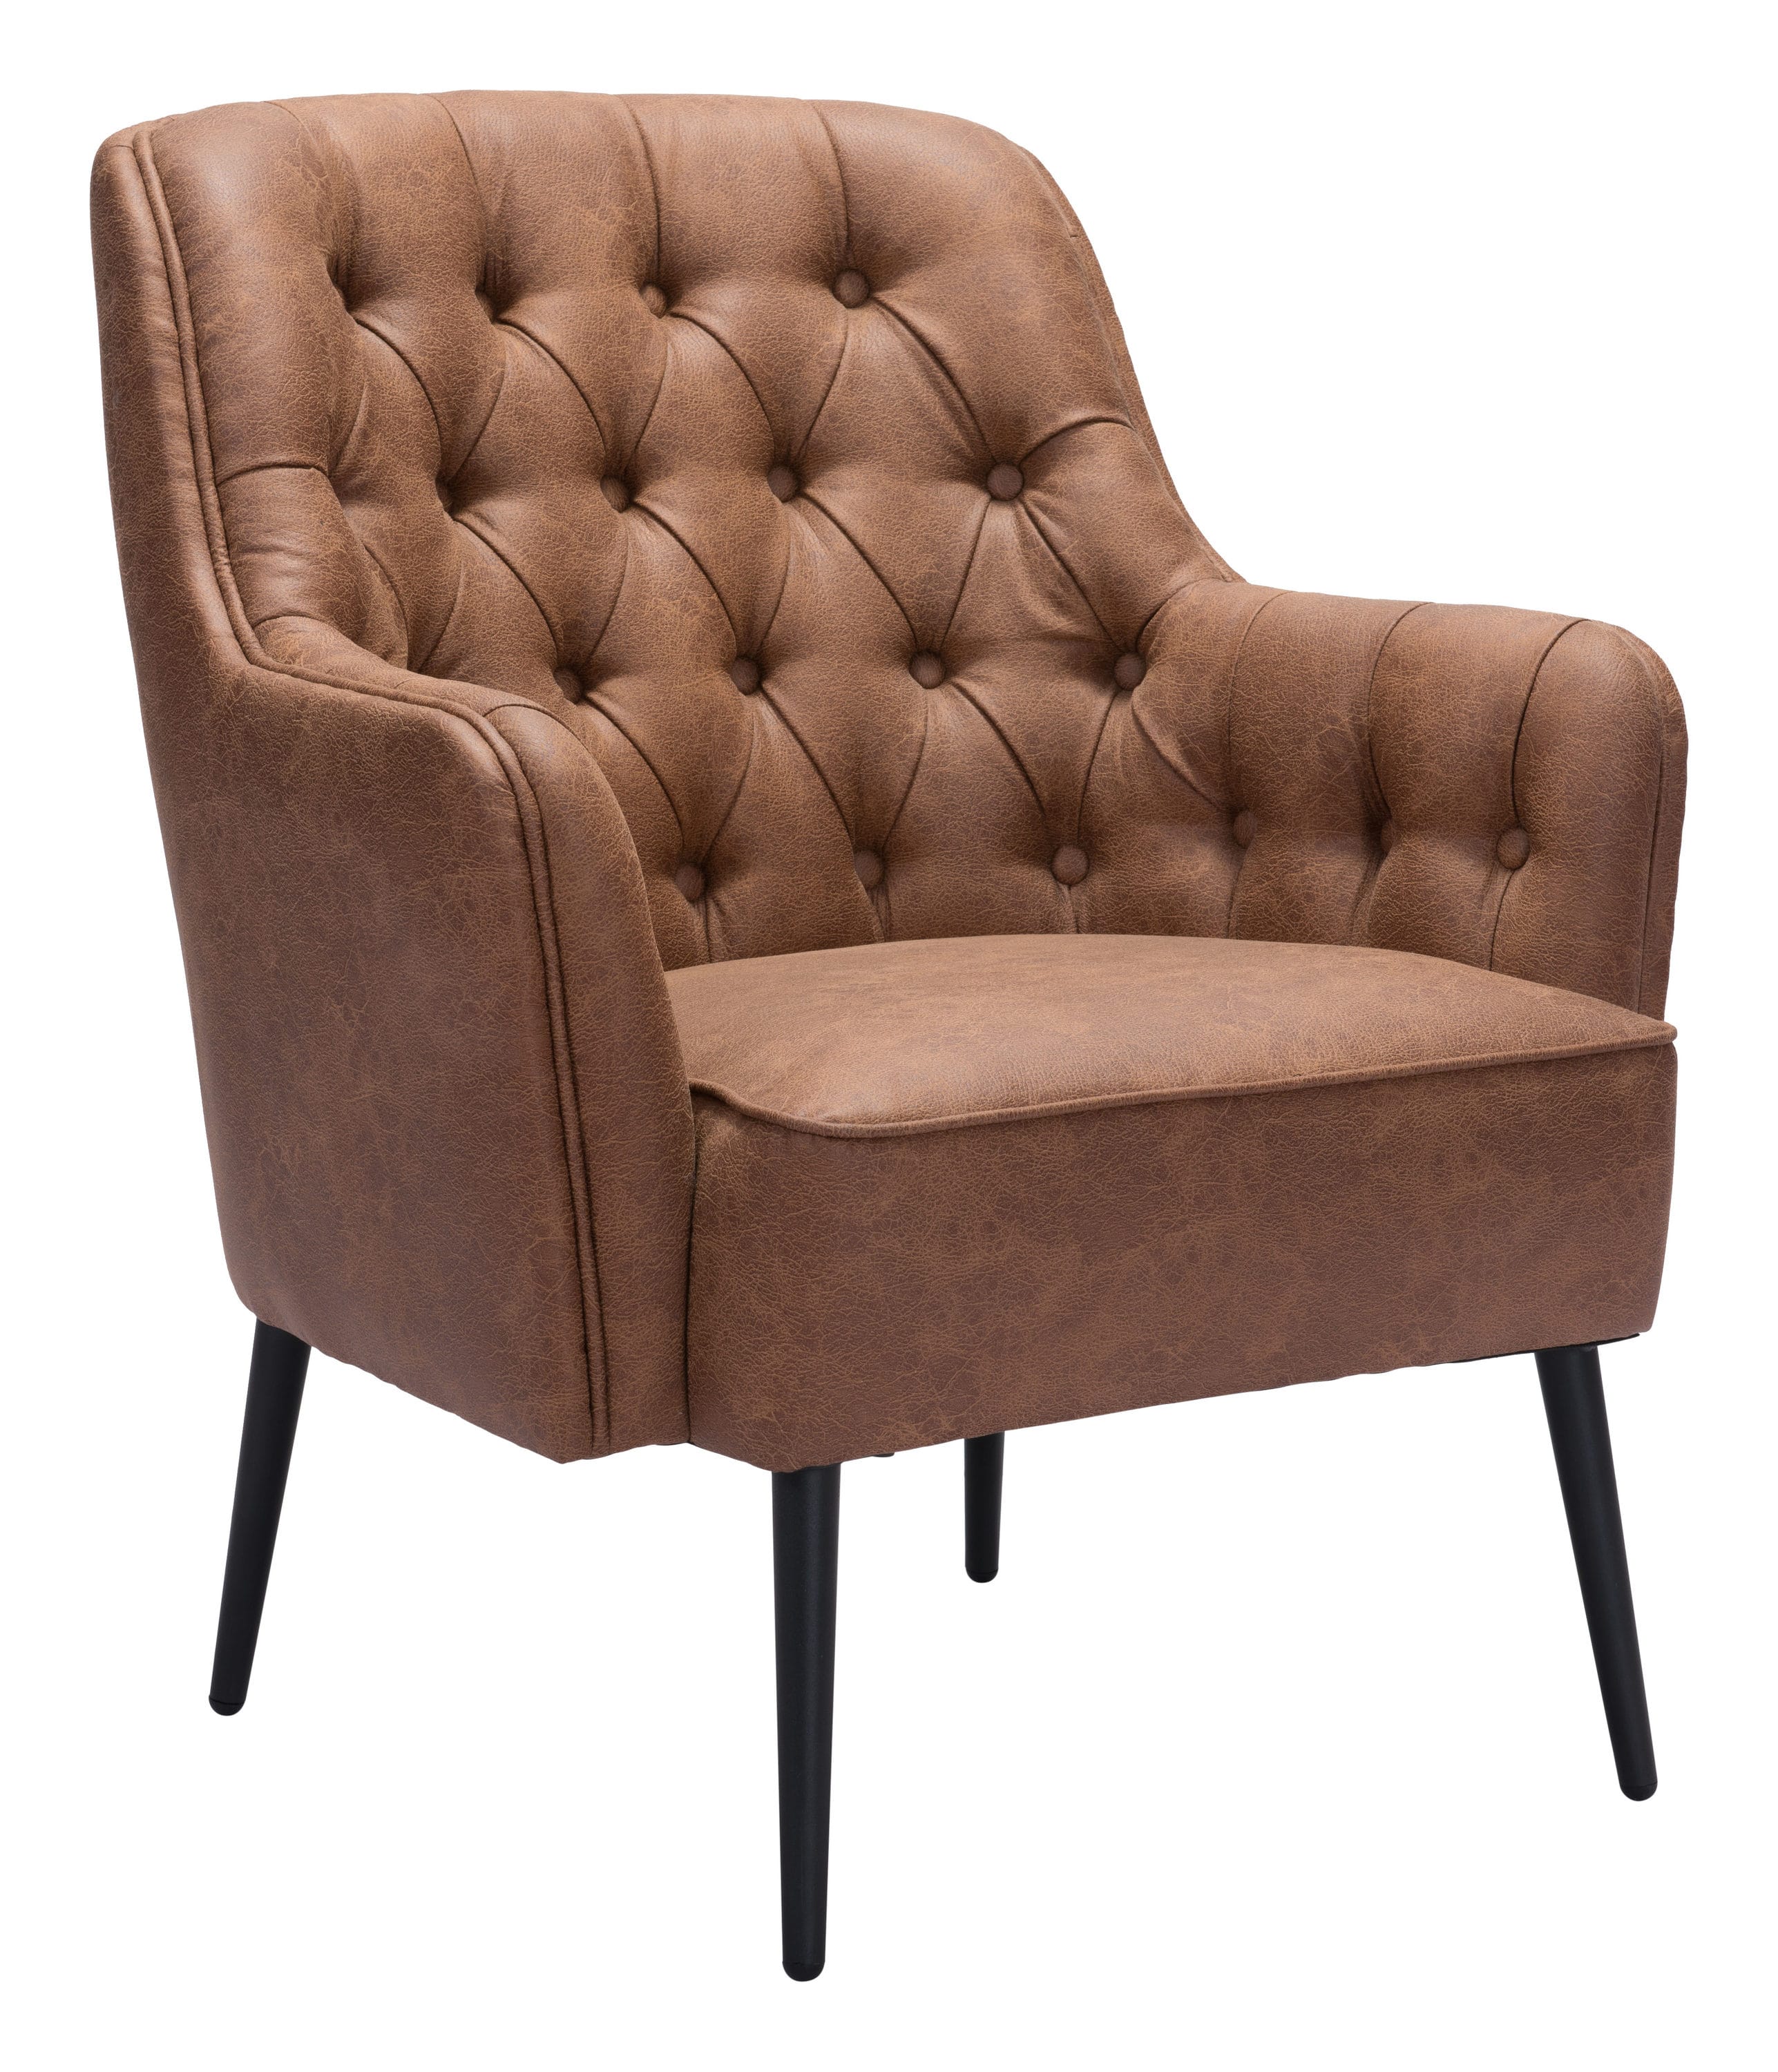 Zuo Modern Tasmania Modern Vintage Brown Accent Chair at Lowes.com